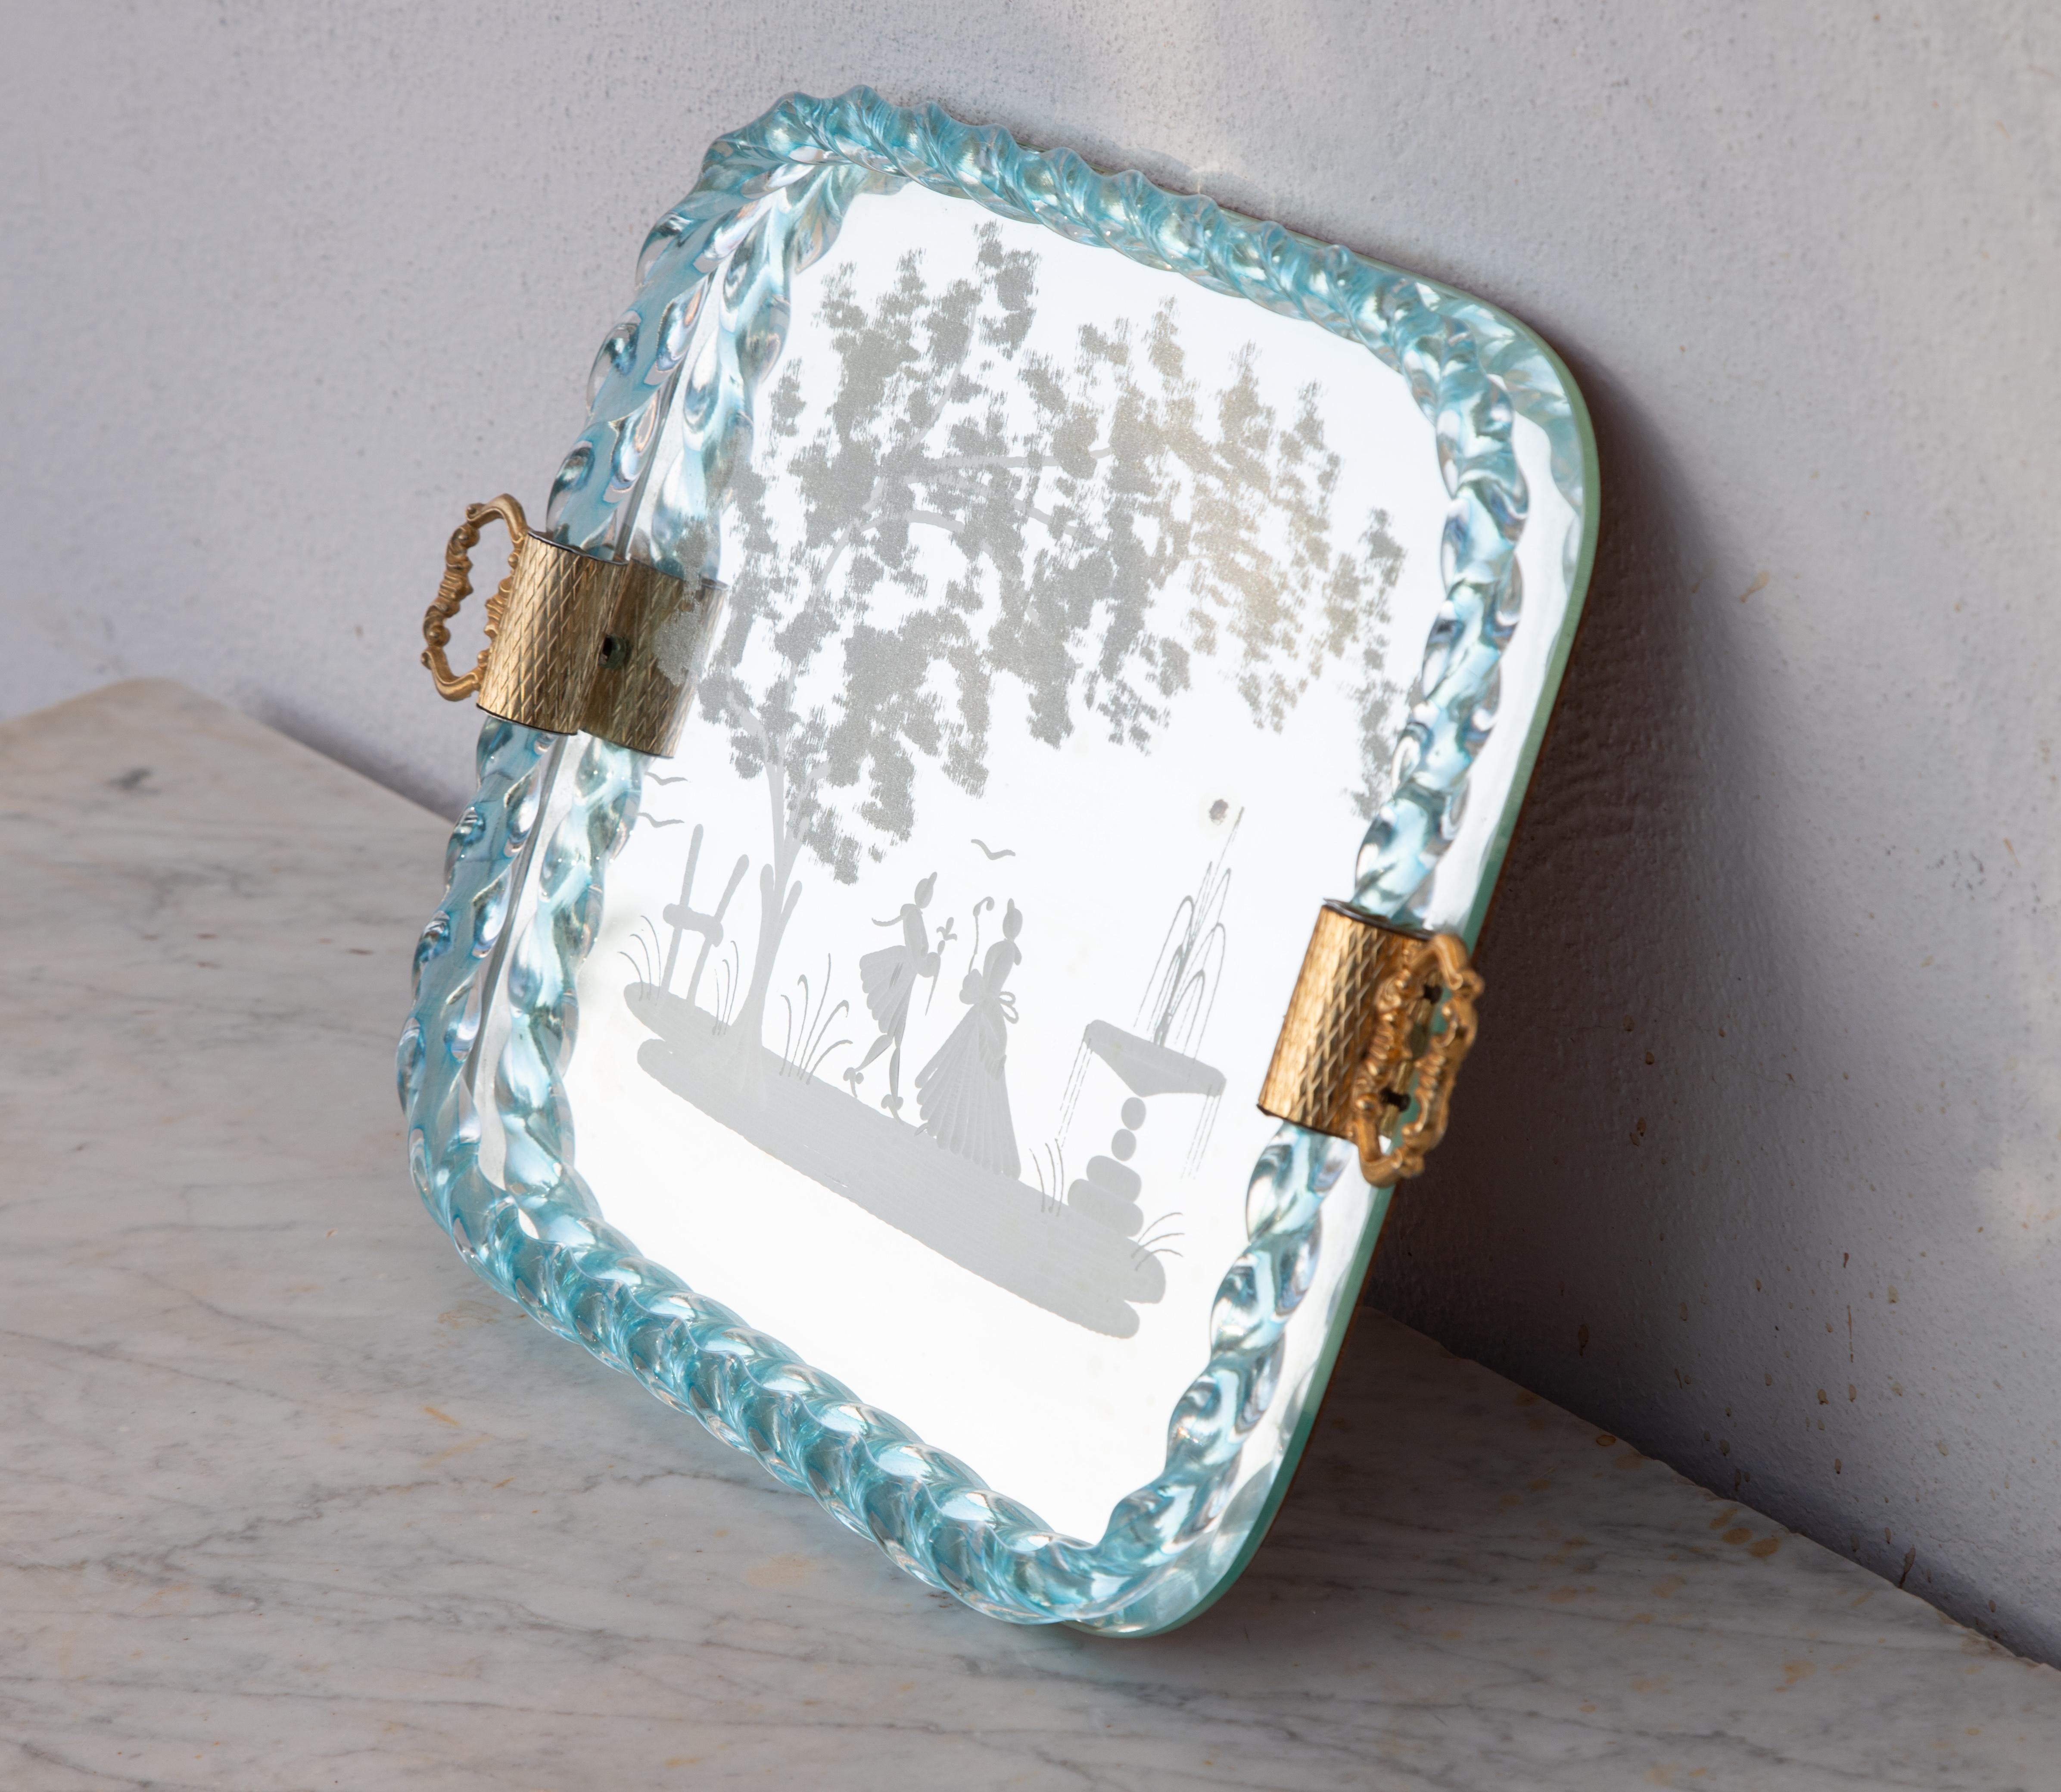 Ercole Barovier Mirror-Engraved Murano Glass Italian Serving Tray, 1940s For Sale 7